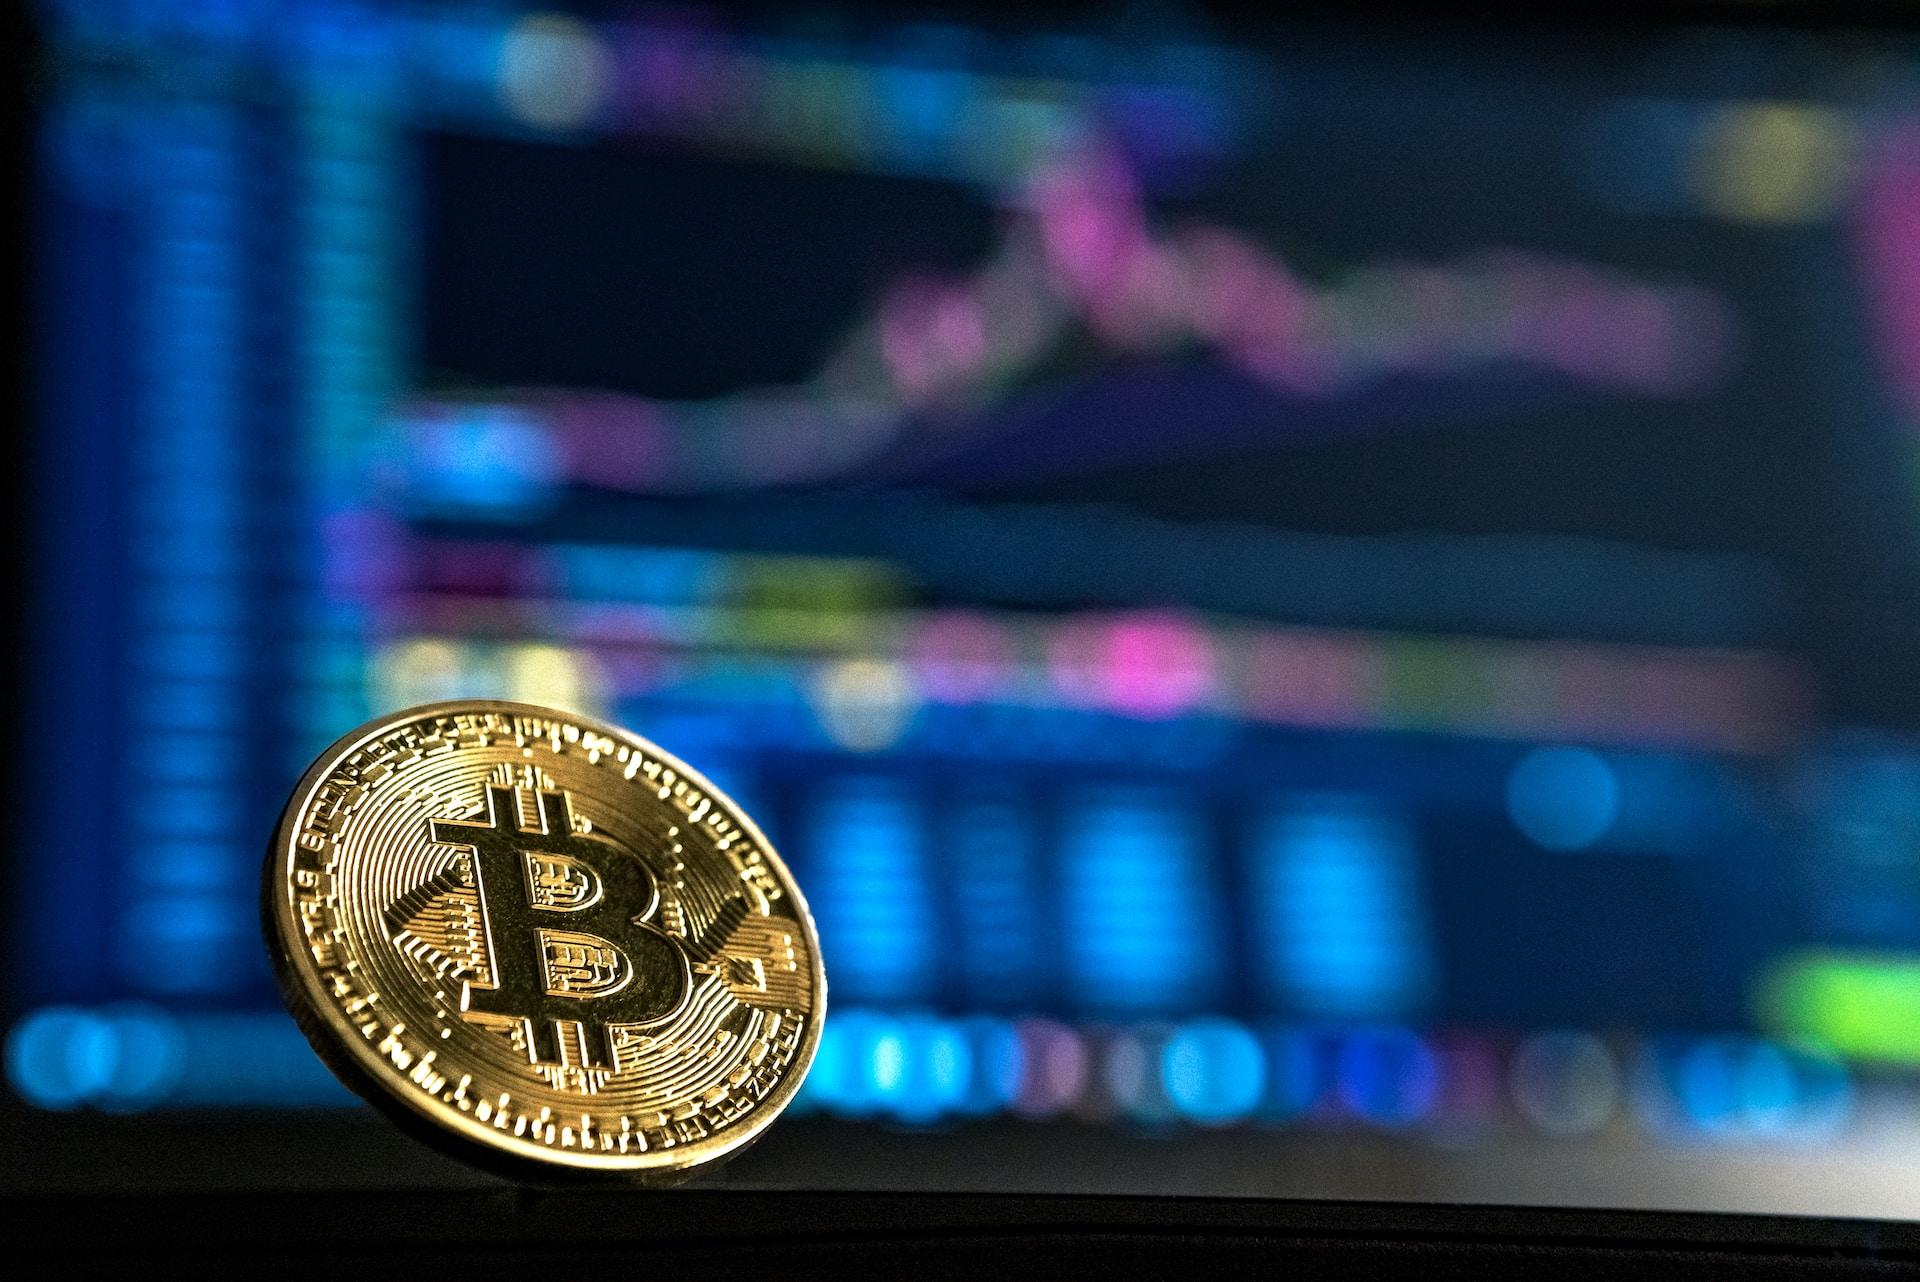 Bitcoin Surges to $57,000, Triggering Significant Market Movements